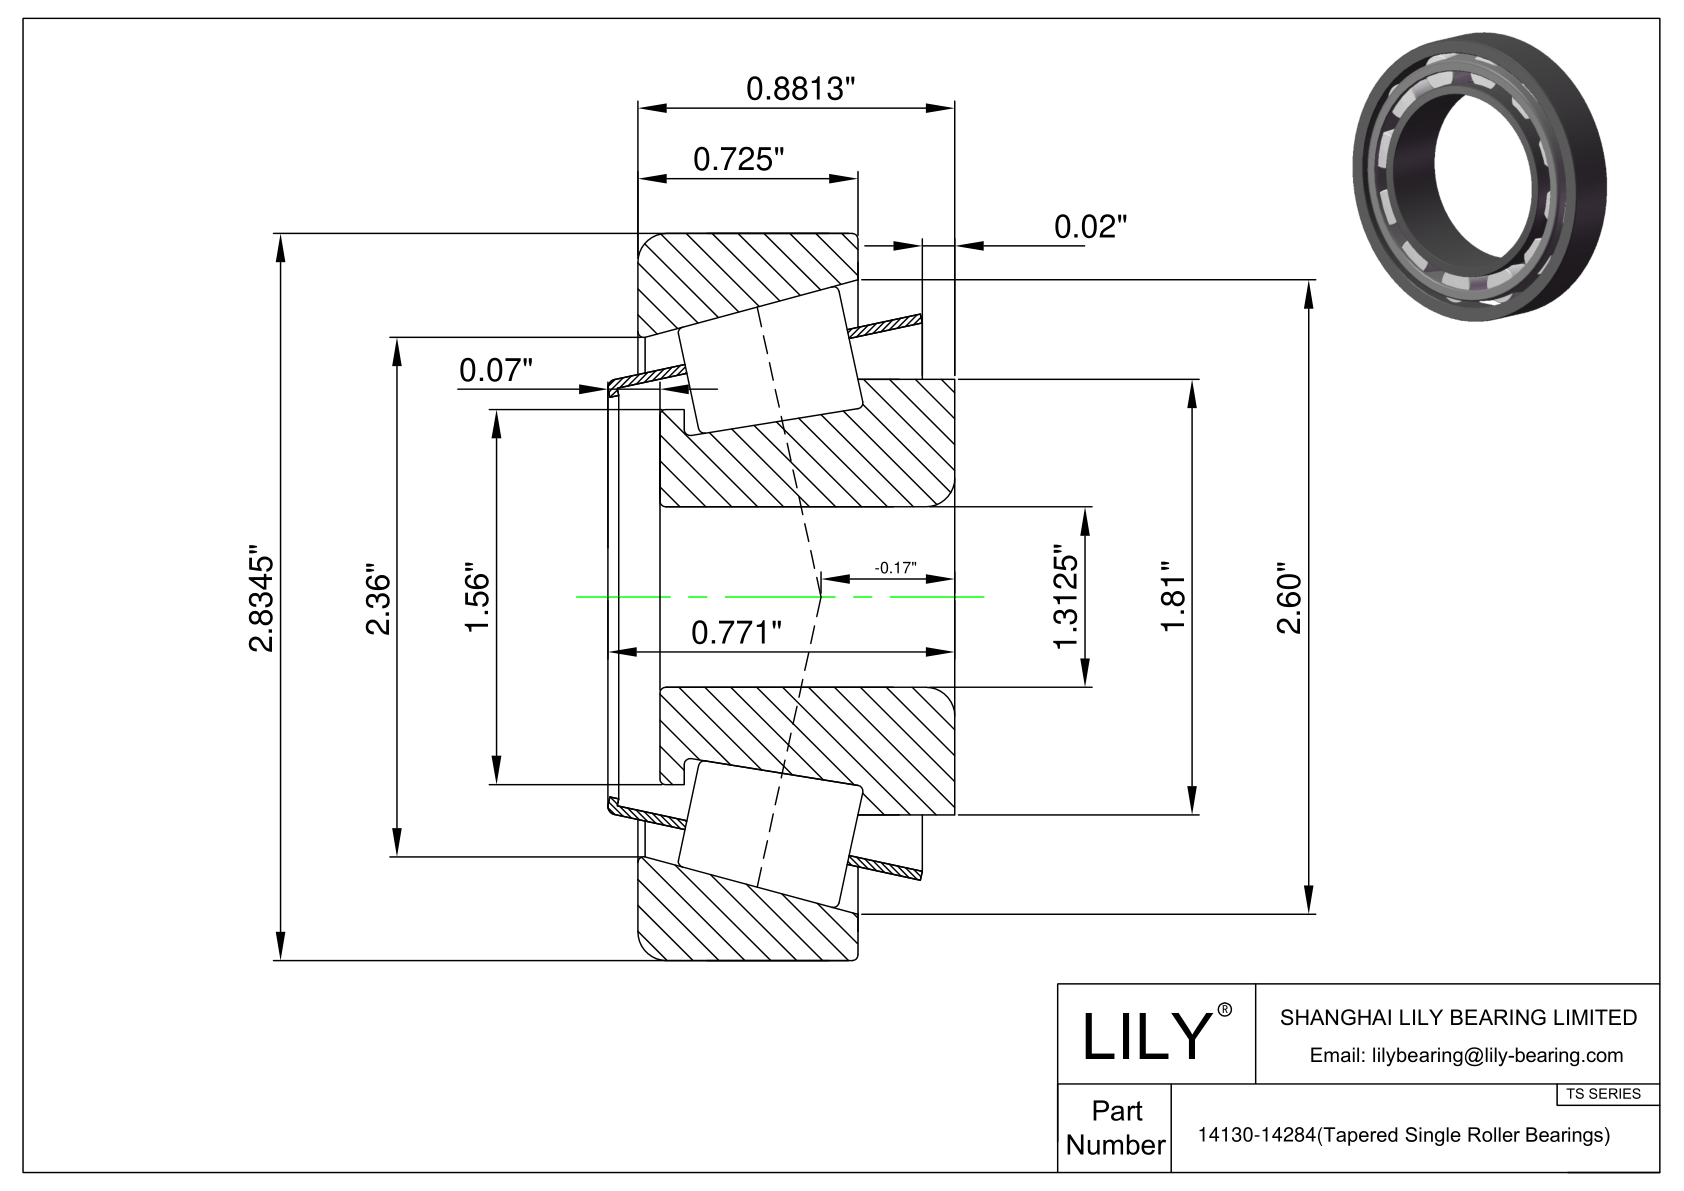 14130-14284 TS (Tapered Single Roller Bearings) (Imperial) cad drawing